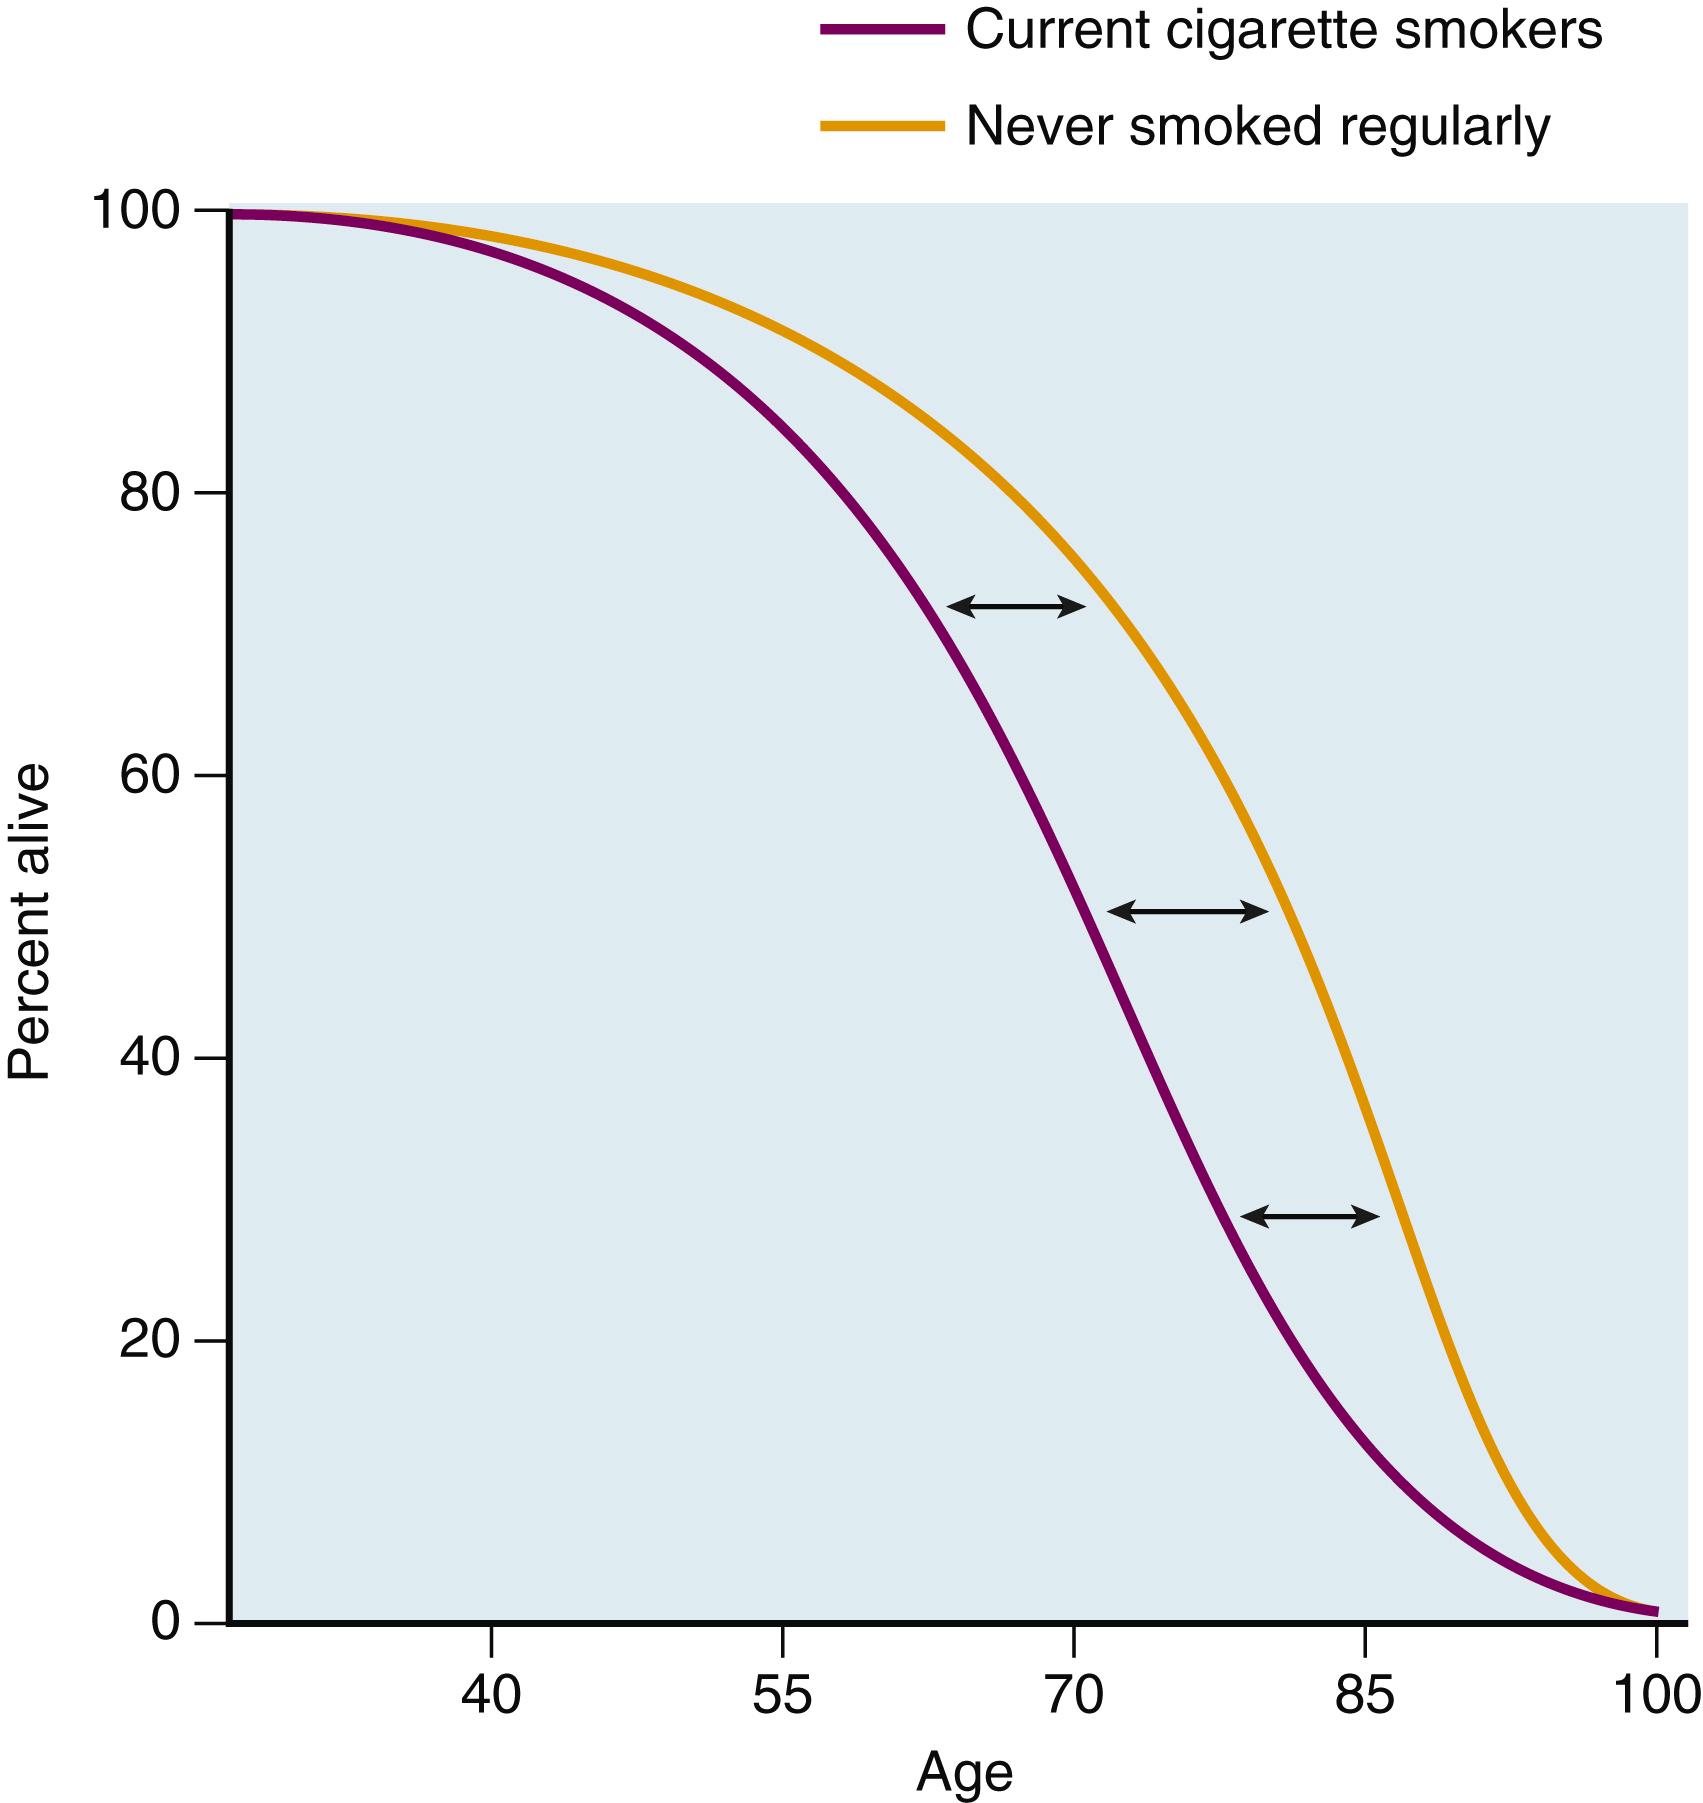 FIG. 7.8, The effects of smoking on survival. The study compared age-specific death rates for current cigarette smokers with those of individuals who never smoked regularly (British Doctors Study). The difference in survival, measured at age 75, between smokers and nonsmokers is 7.5 years.